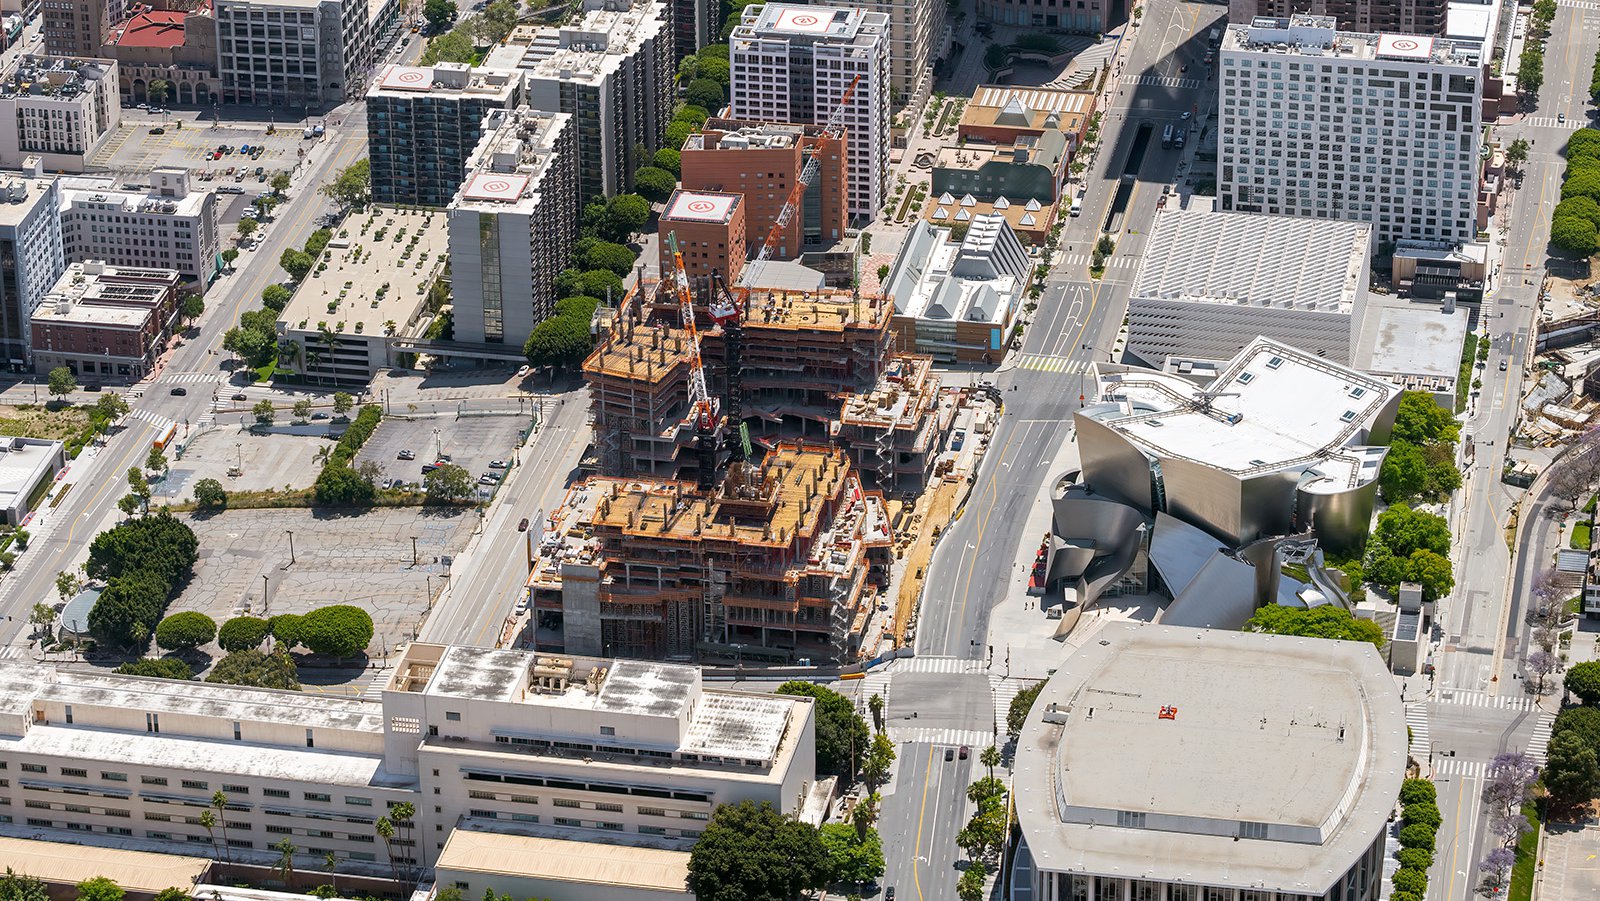 Aerial construction photo showing the construction progress of The Grand, with the Dorothy Chandler Pavilion, Stanley Mosk Courthouse, Walt Disney Concert Hall and The Broad also visible.